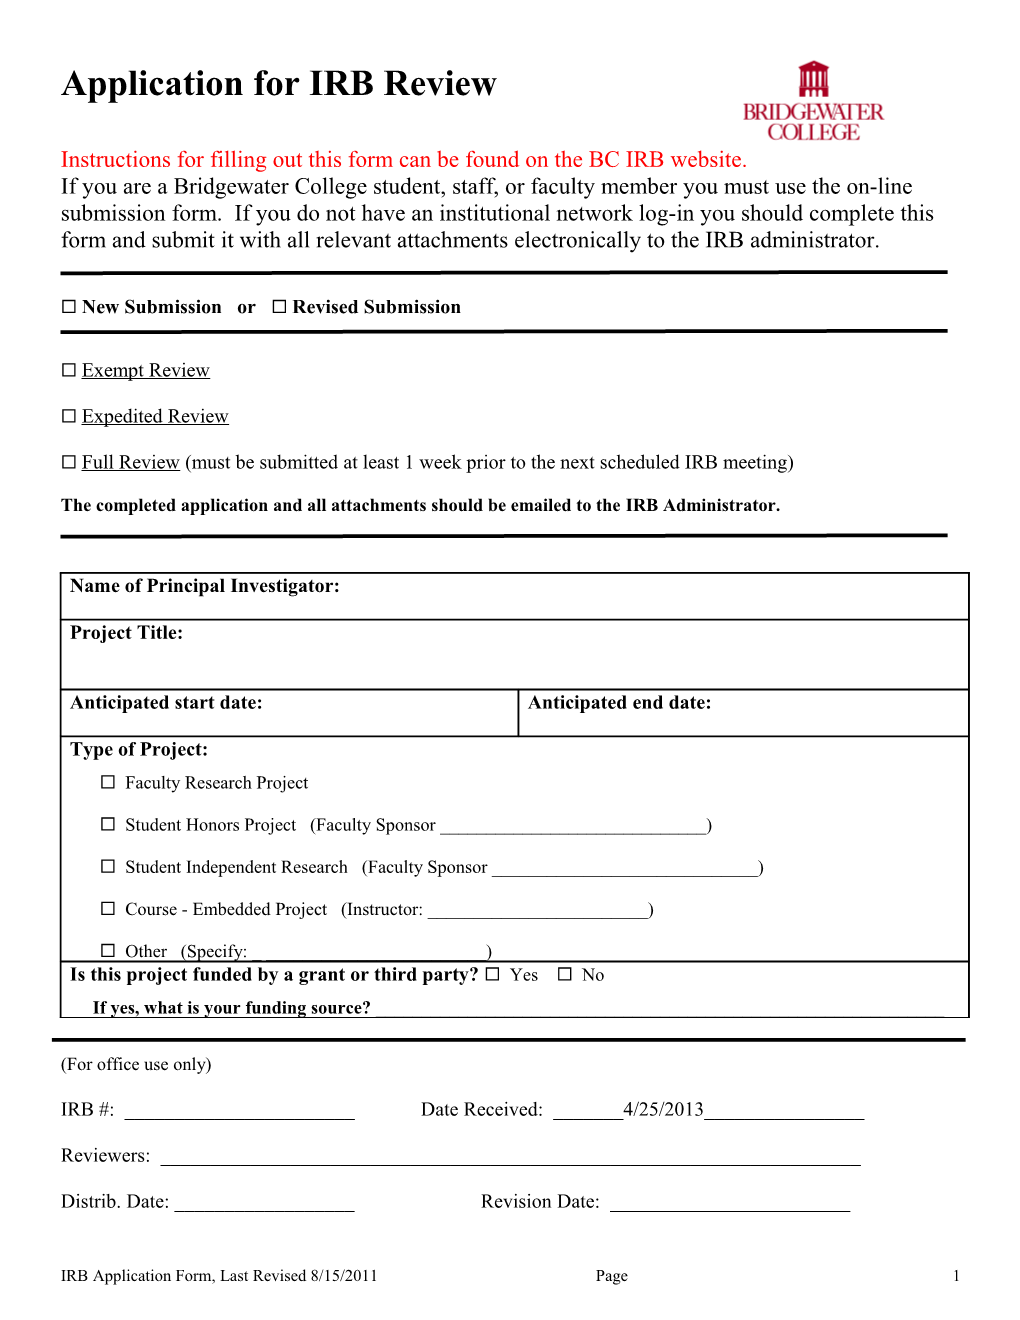 Instructions for Filling out This Form Can Be Found on the BC IRB Website